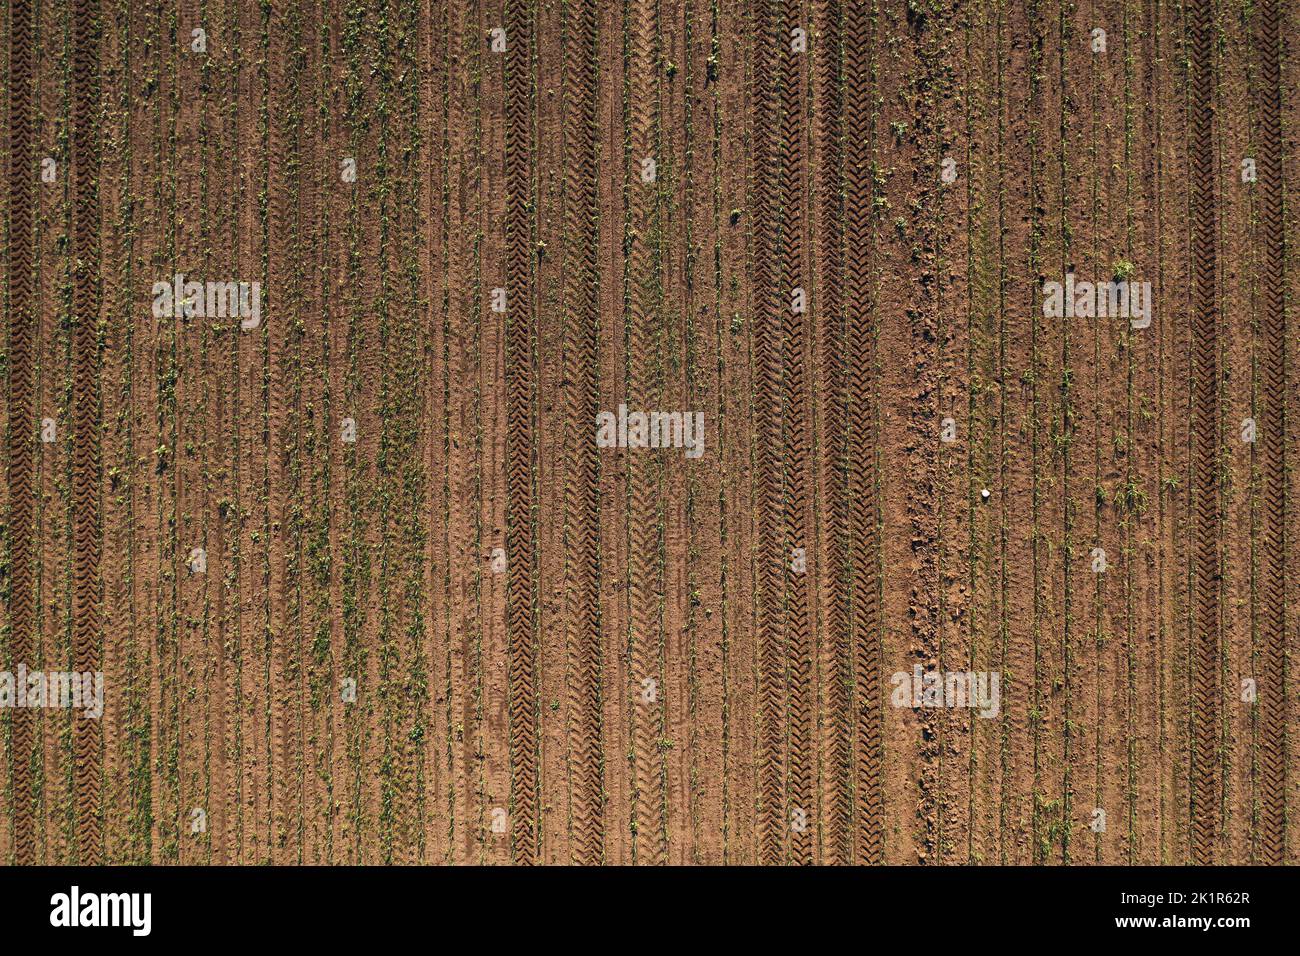 Aerial shot of corn seedling field from drone pov directly above with tractor tyre tracks in soil as agricultural background Stock Photo